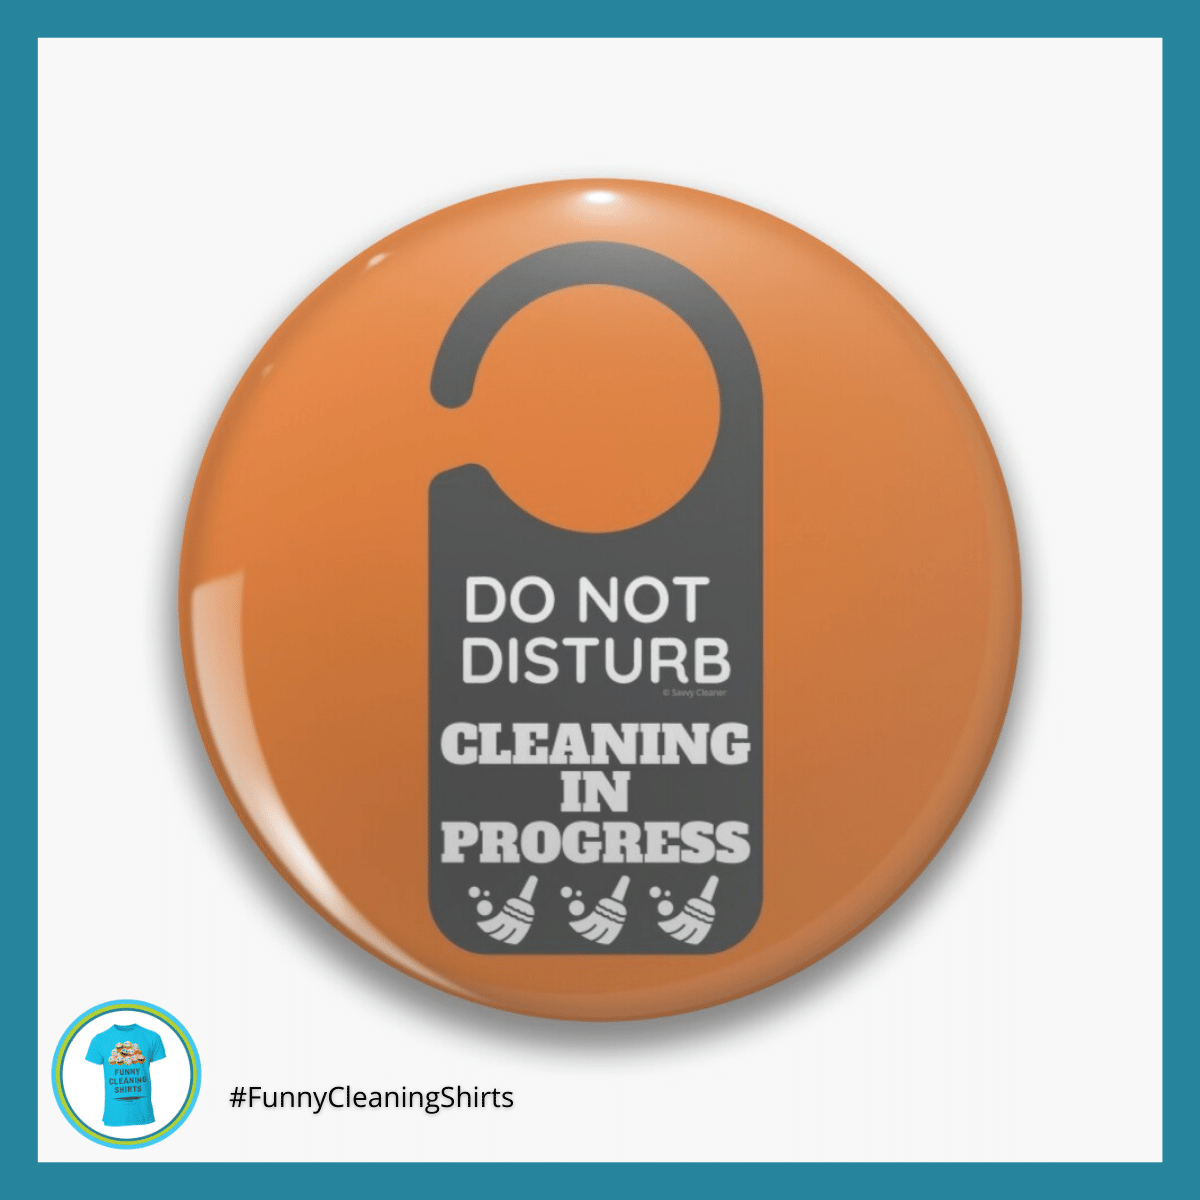 Cleaning in Progress Savvy Cleaner Funny Cleaning Shirts Button